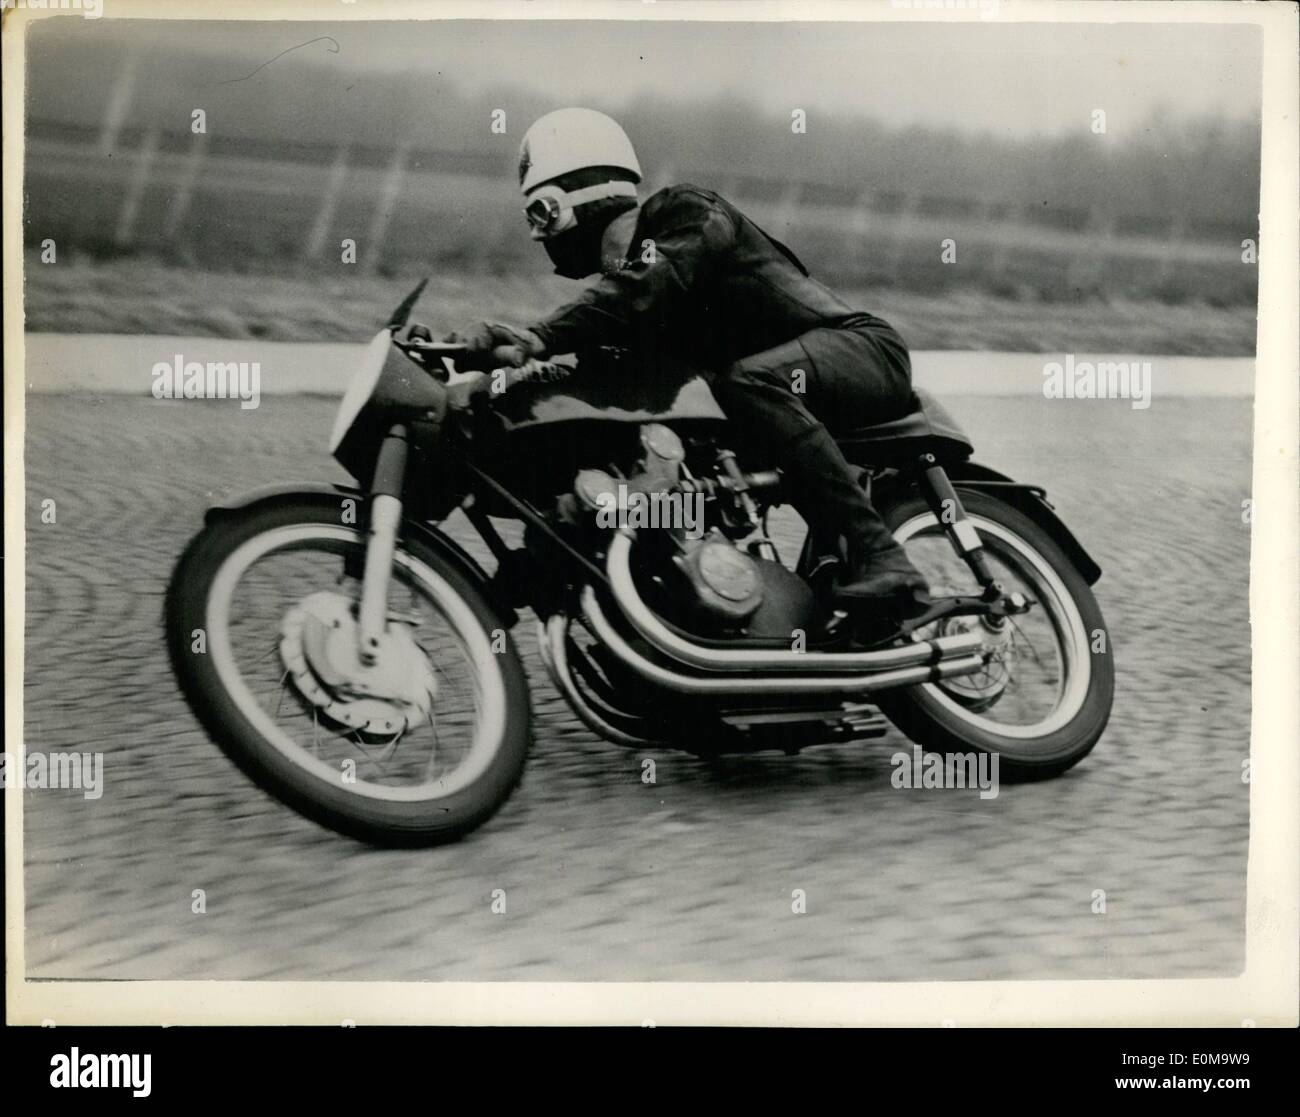 Mar. 03, 1954 - Geoff Duke tries out the new gilera. Bristish rider and Italian four cylinder machine: Photo shows Geoff Duke the famous British Motor Cycle ace - seen at speed when he tested out the new Italian 4 cylinder 500 c.c. Gilera machine at Monza. Stock Photo